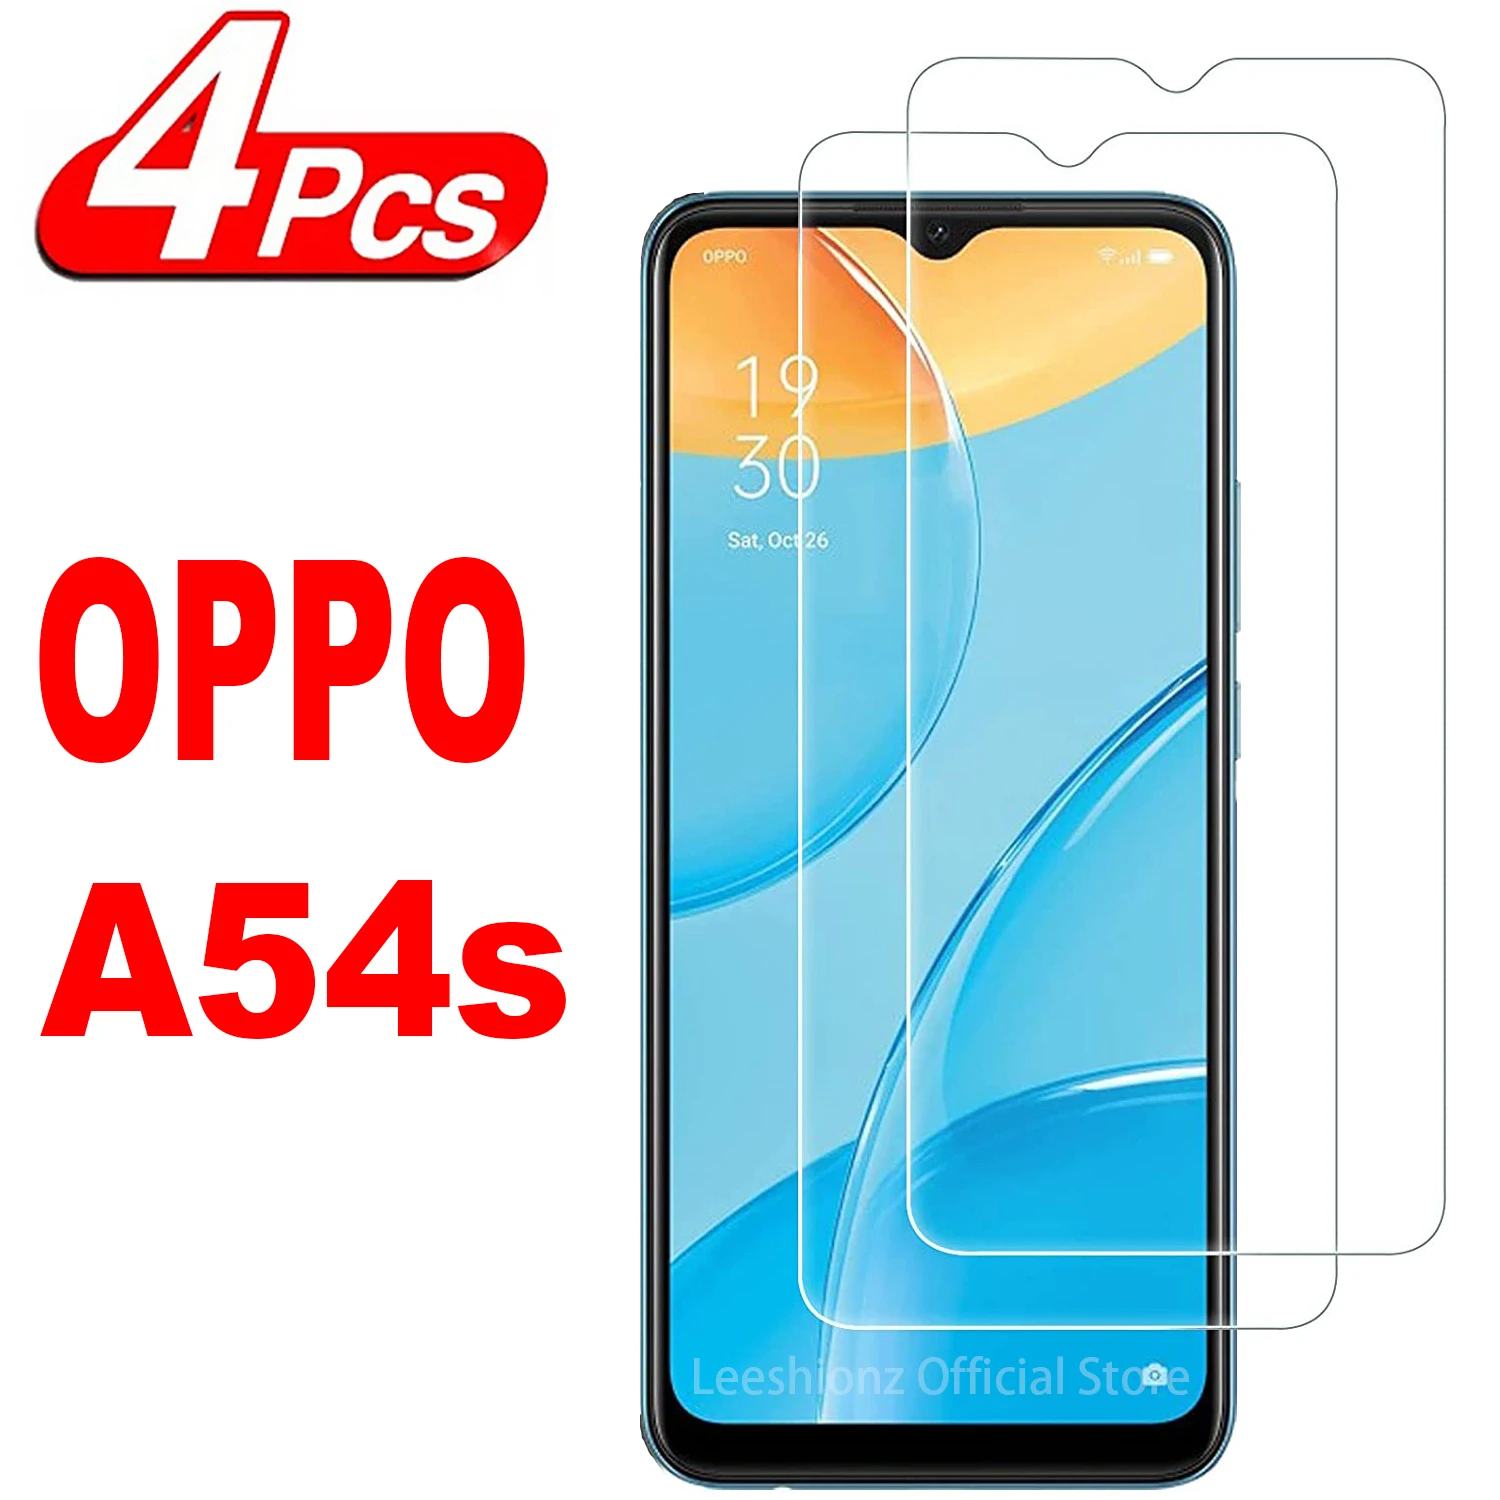 

2/4Pcs Tempered For OPPO A54S A53 A53S A55 A58 A57S A74 A76 A77 A78 A98 5G Screen Protector Glass